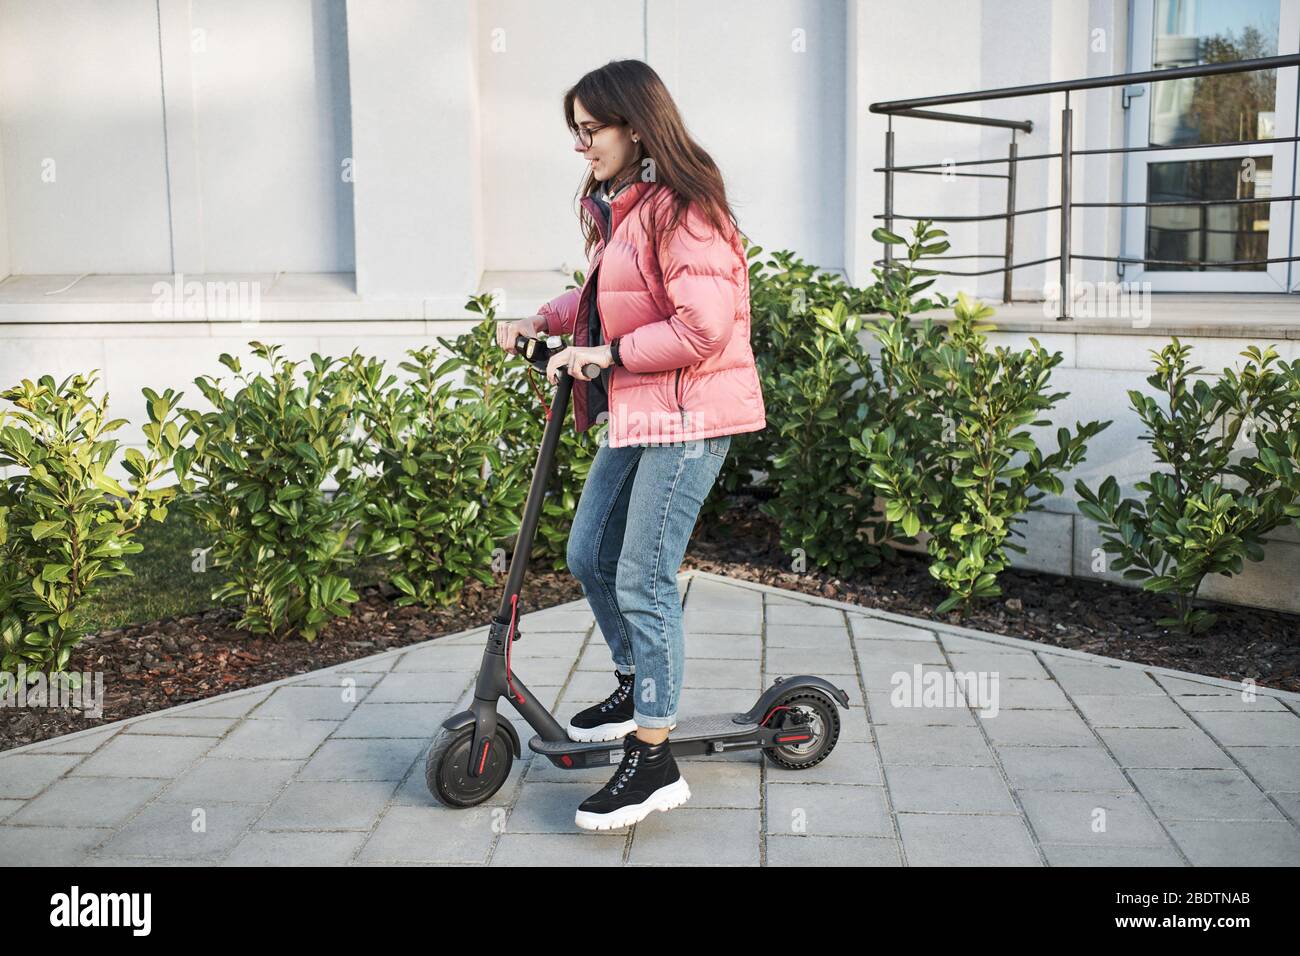 millennial young girl in a pink jacket on an electric scooter Stock Photo